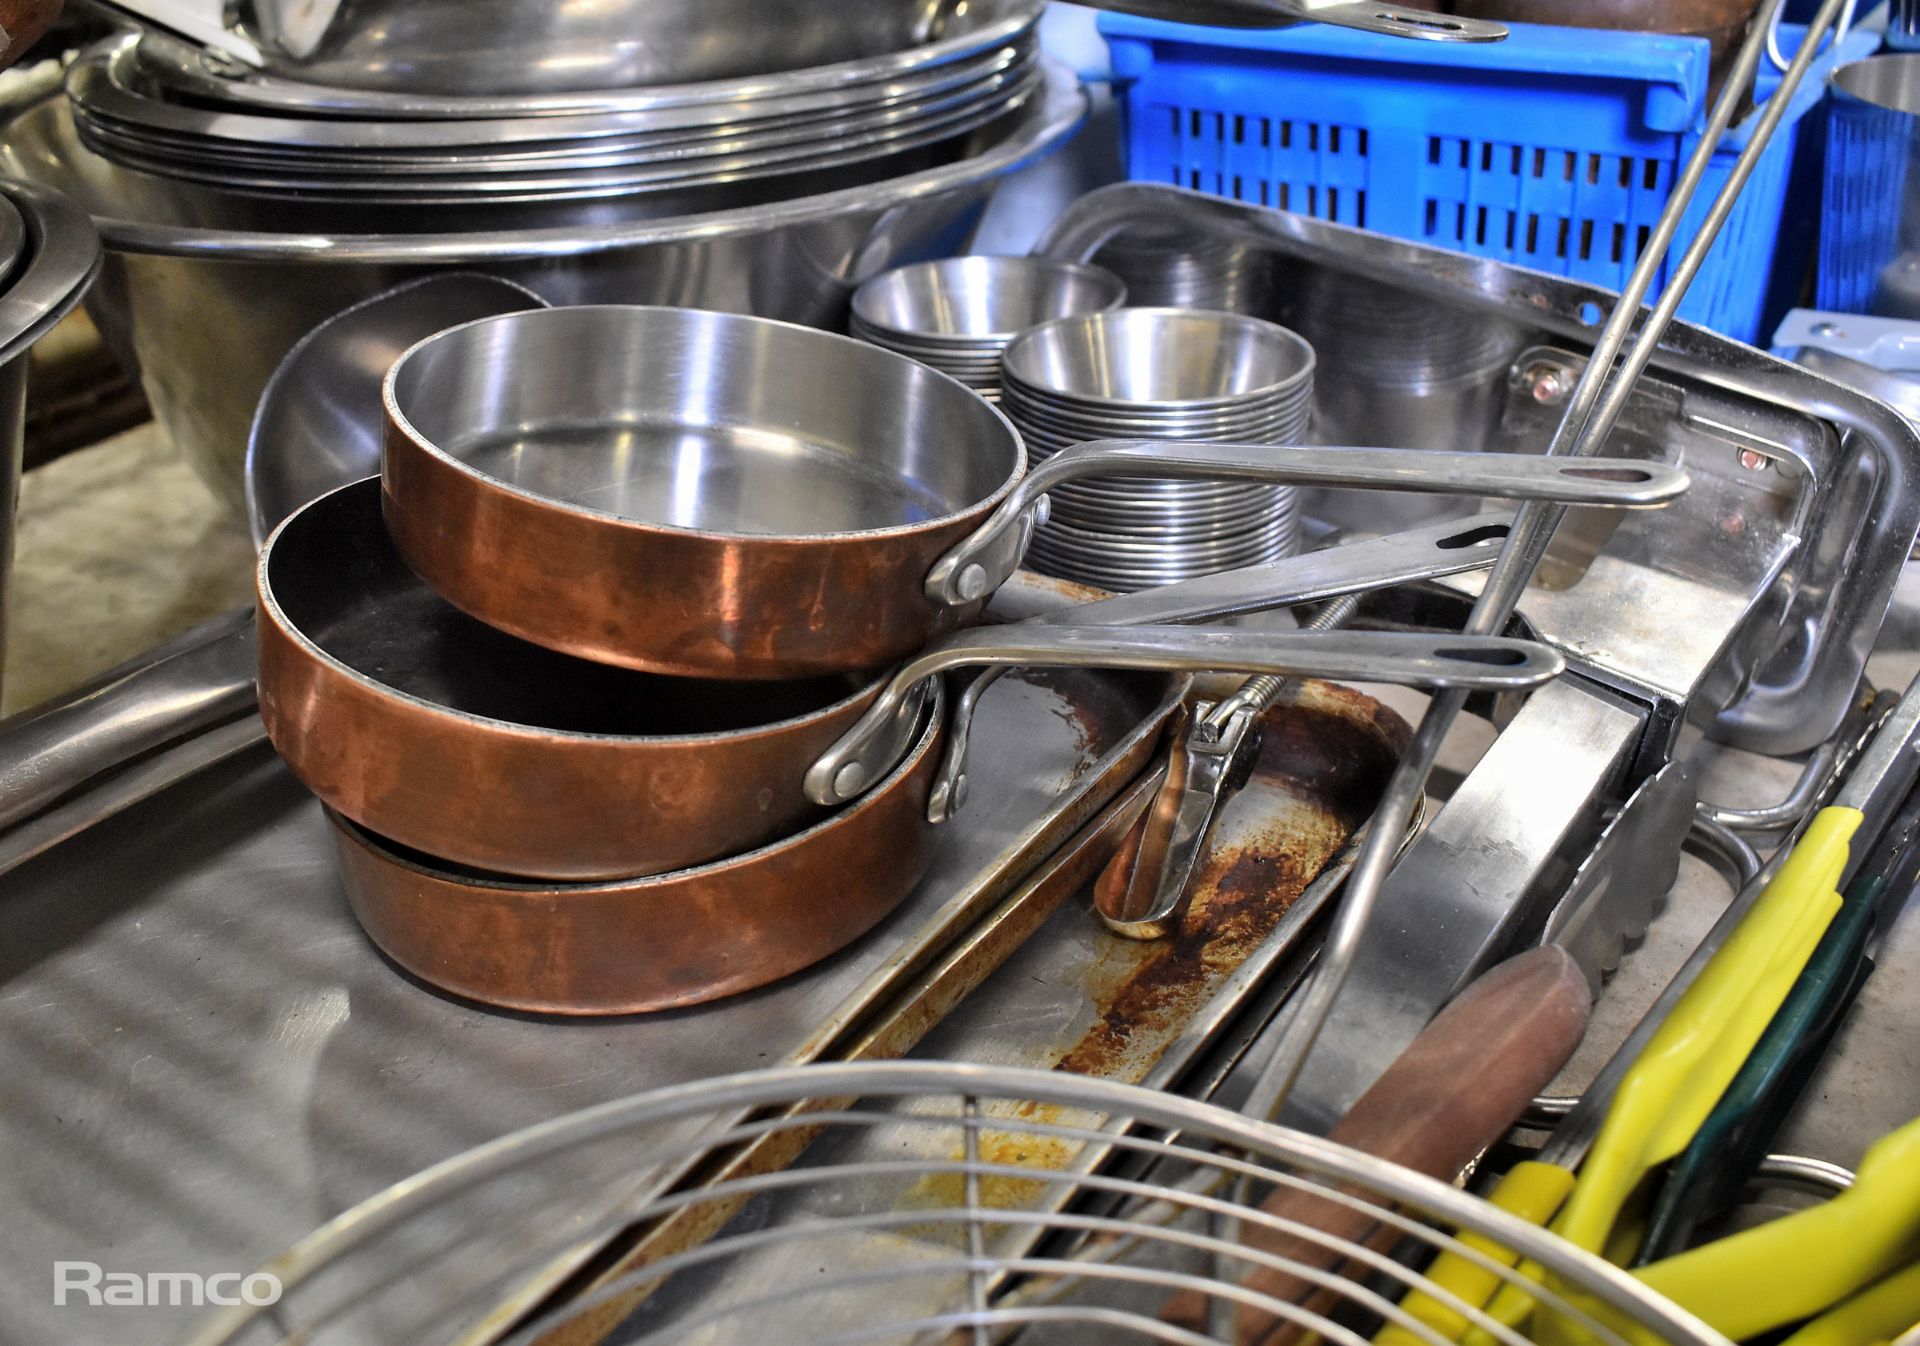 Catering equipment - pans, oven cooking trays, colanders, cutlery and utensils - Image 6 of 6